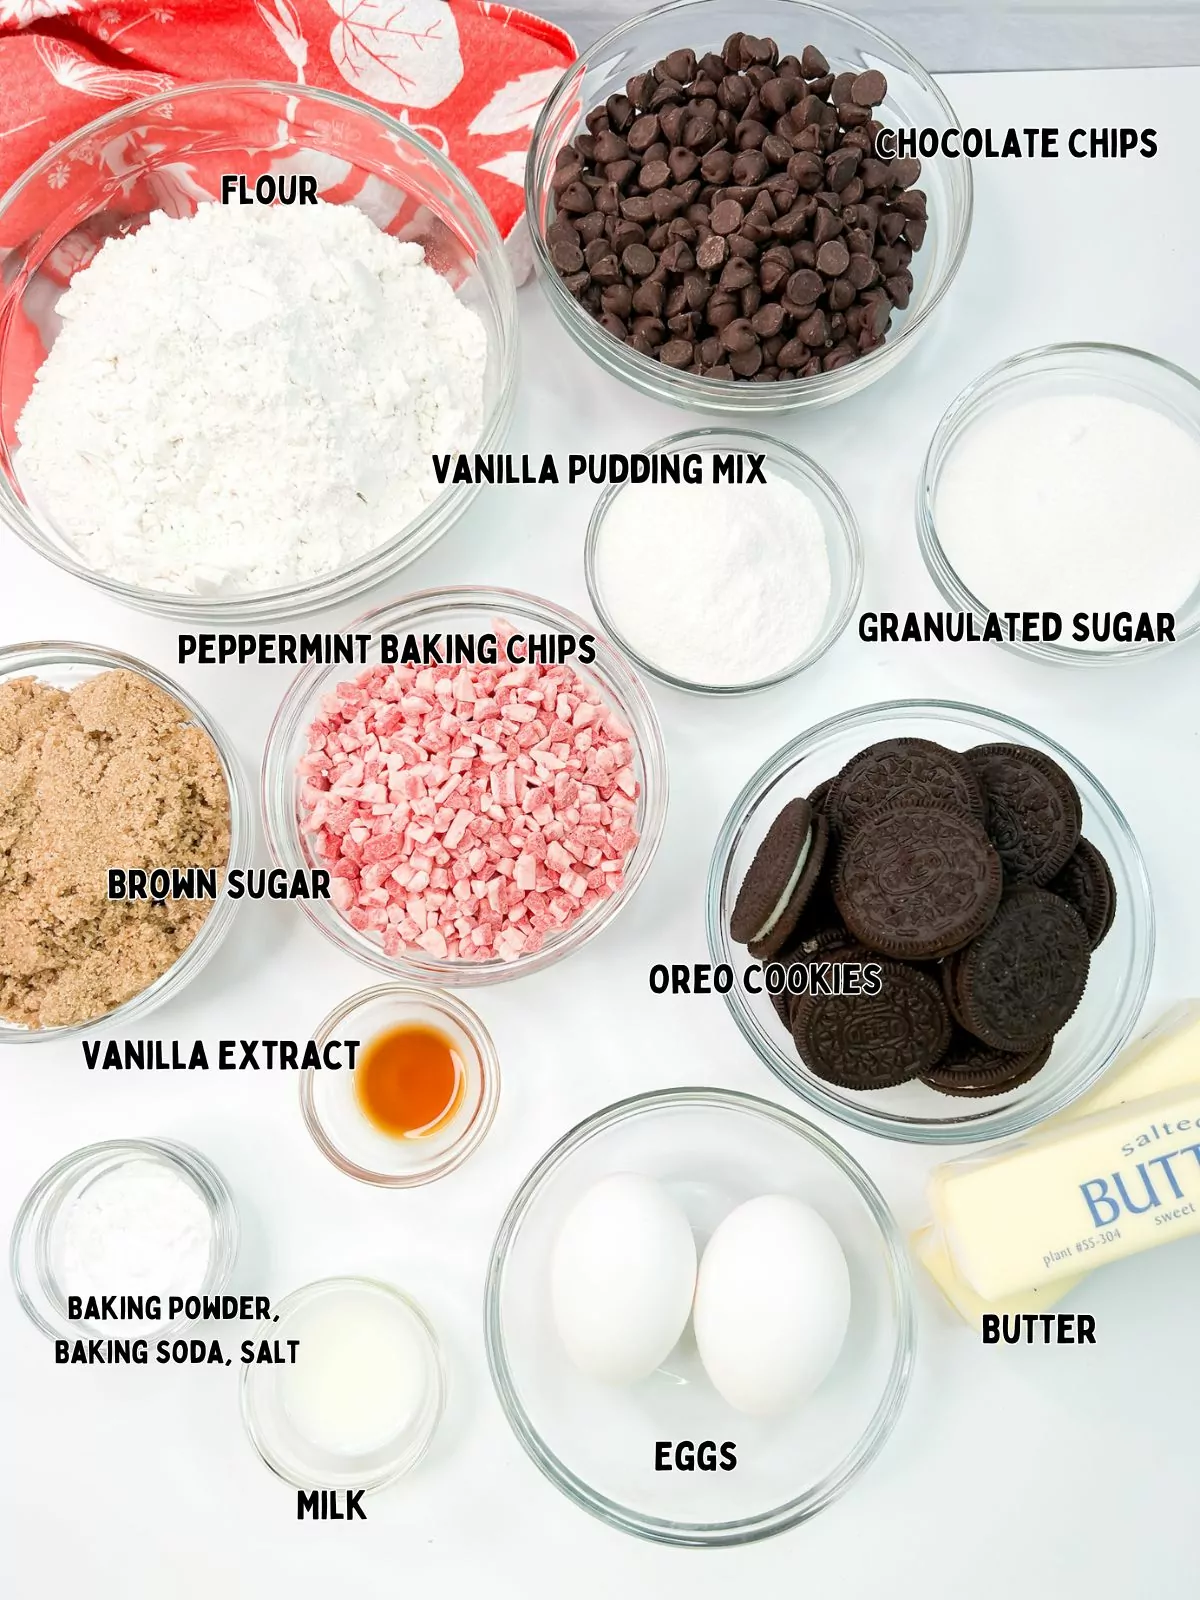 Ingredients for Christmas cookies with Oreos.